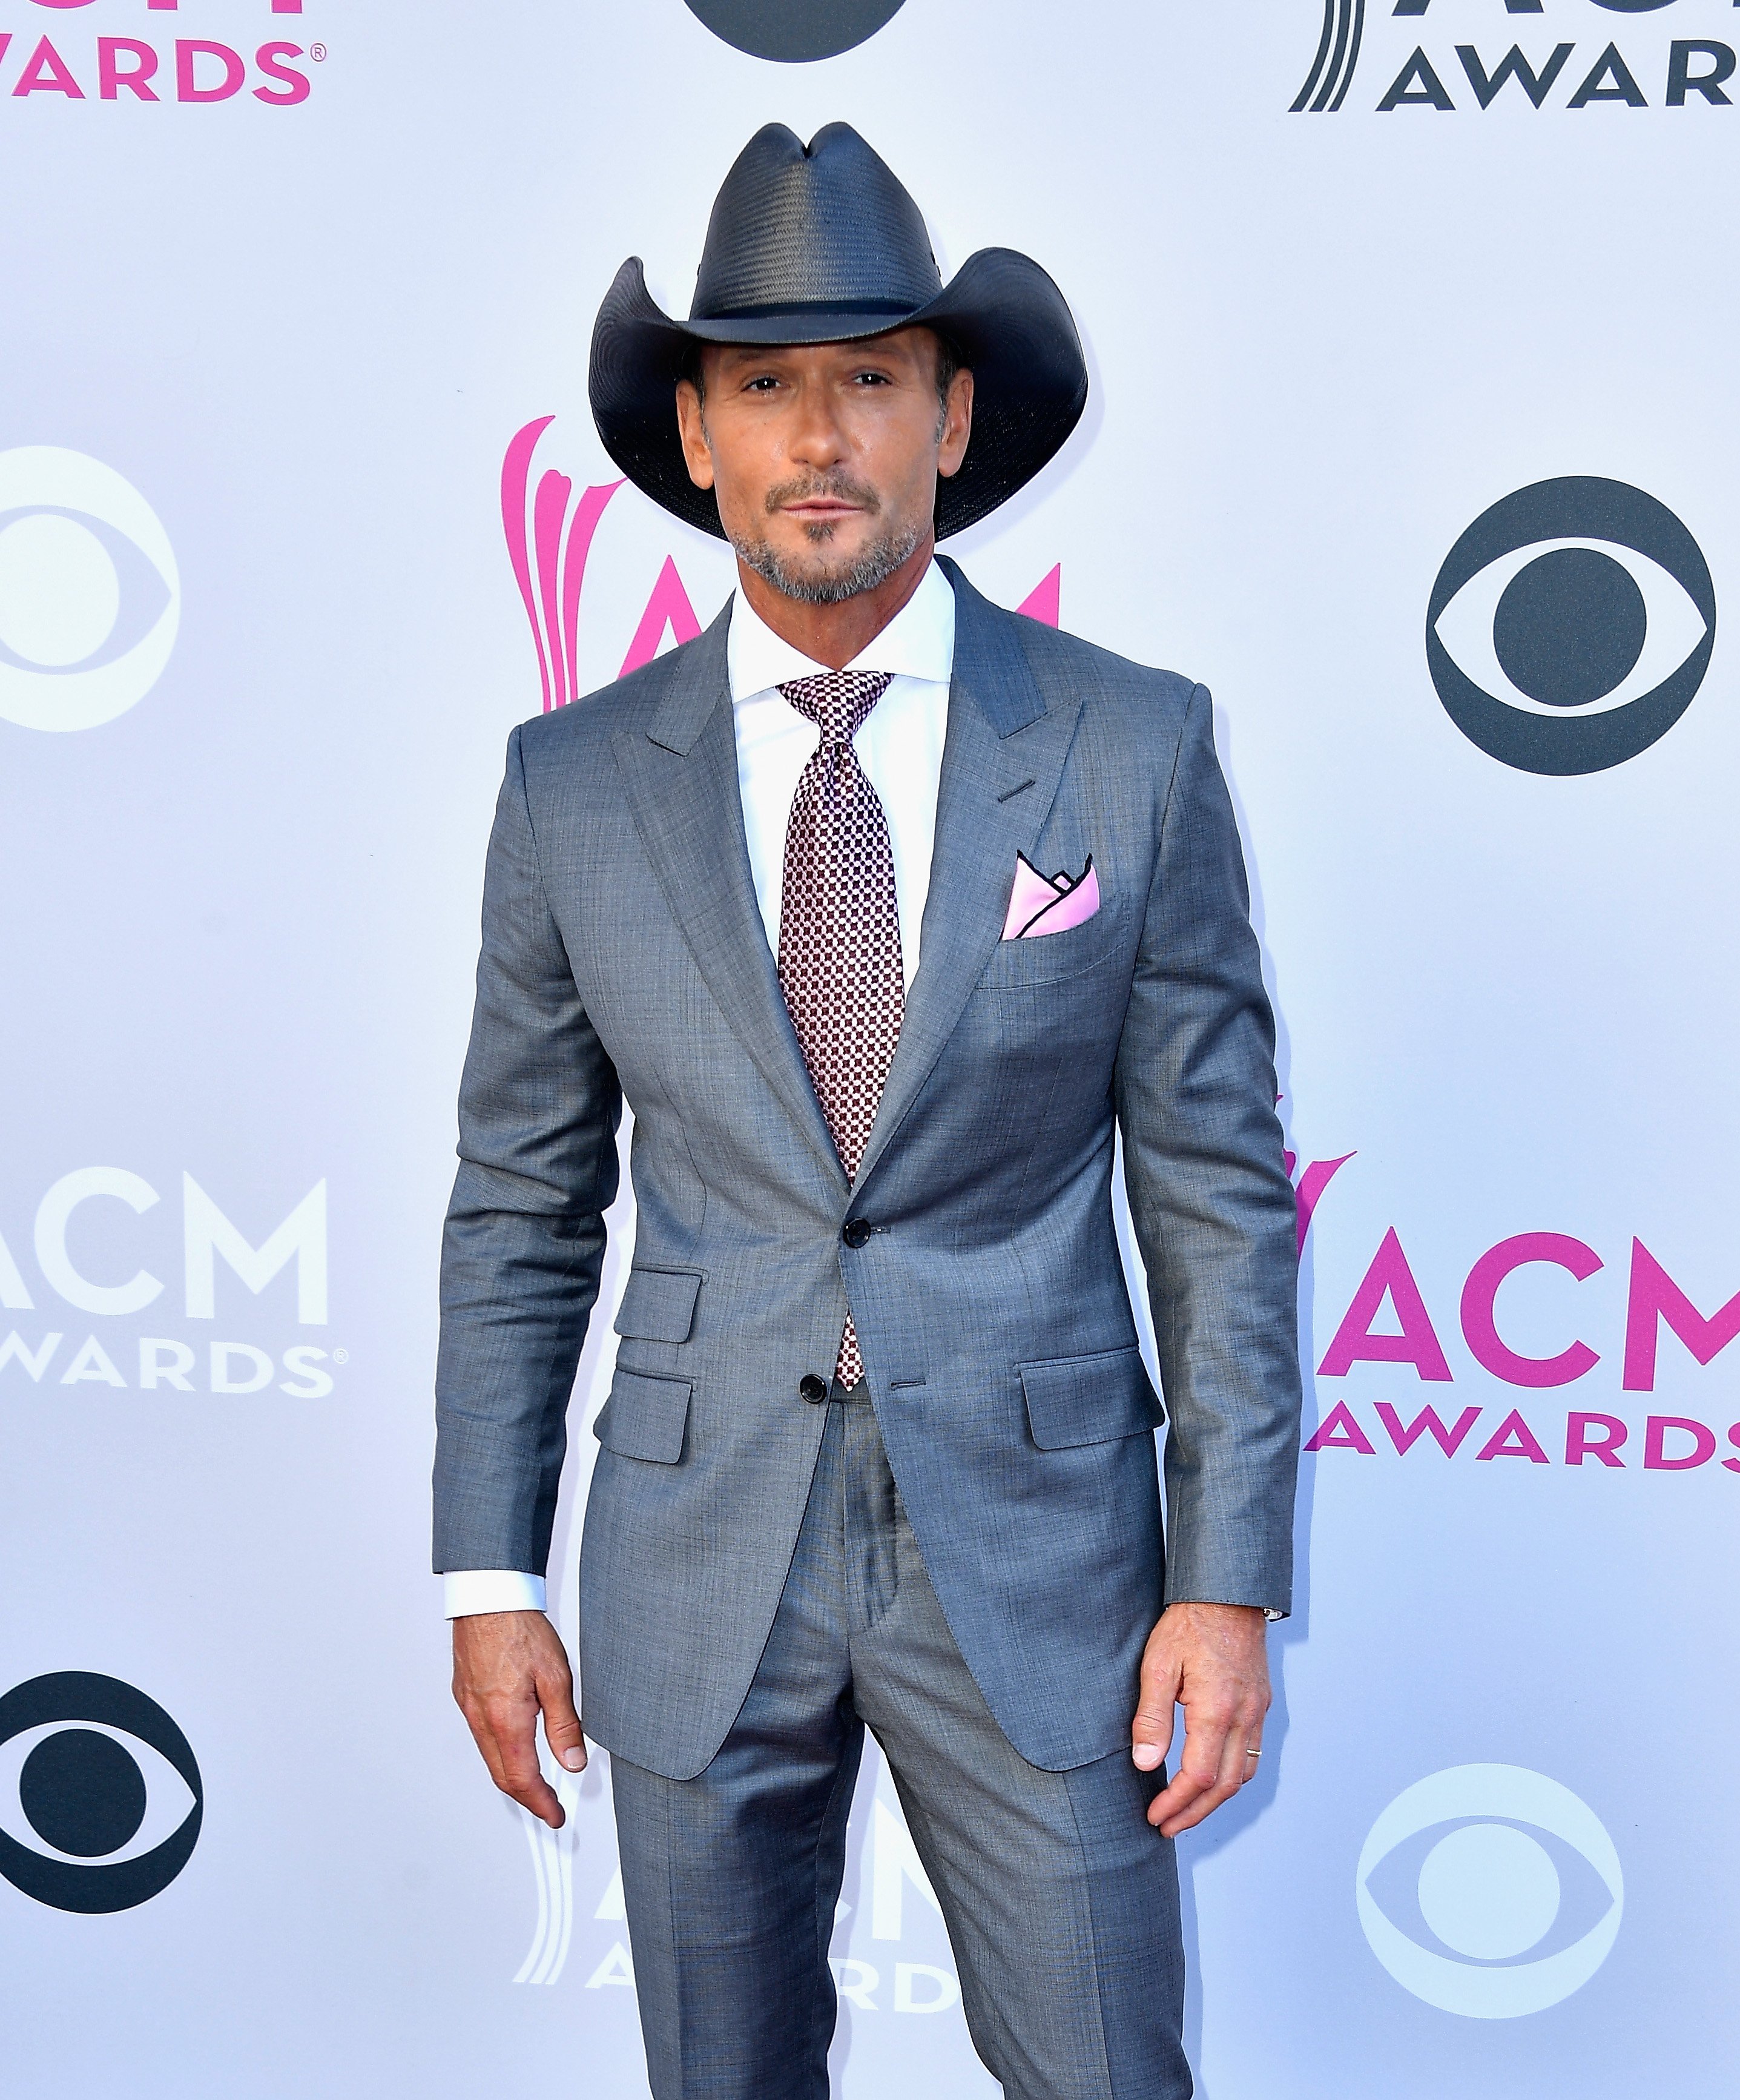 Tim McGraw attends the 52nd Academy Of Country Music Awards. Source | Photo: Getty Images